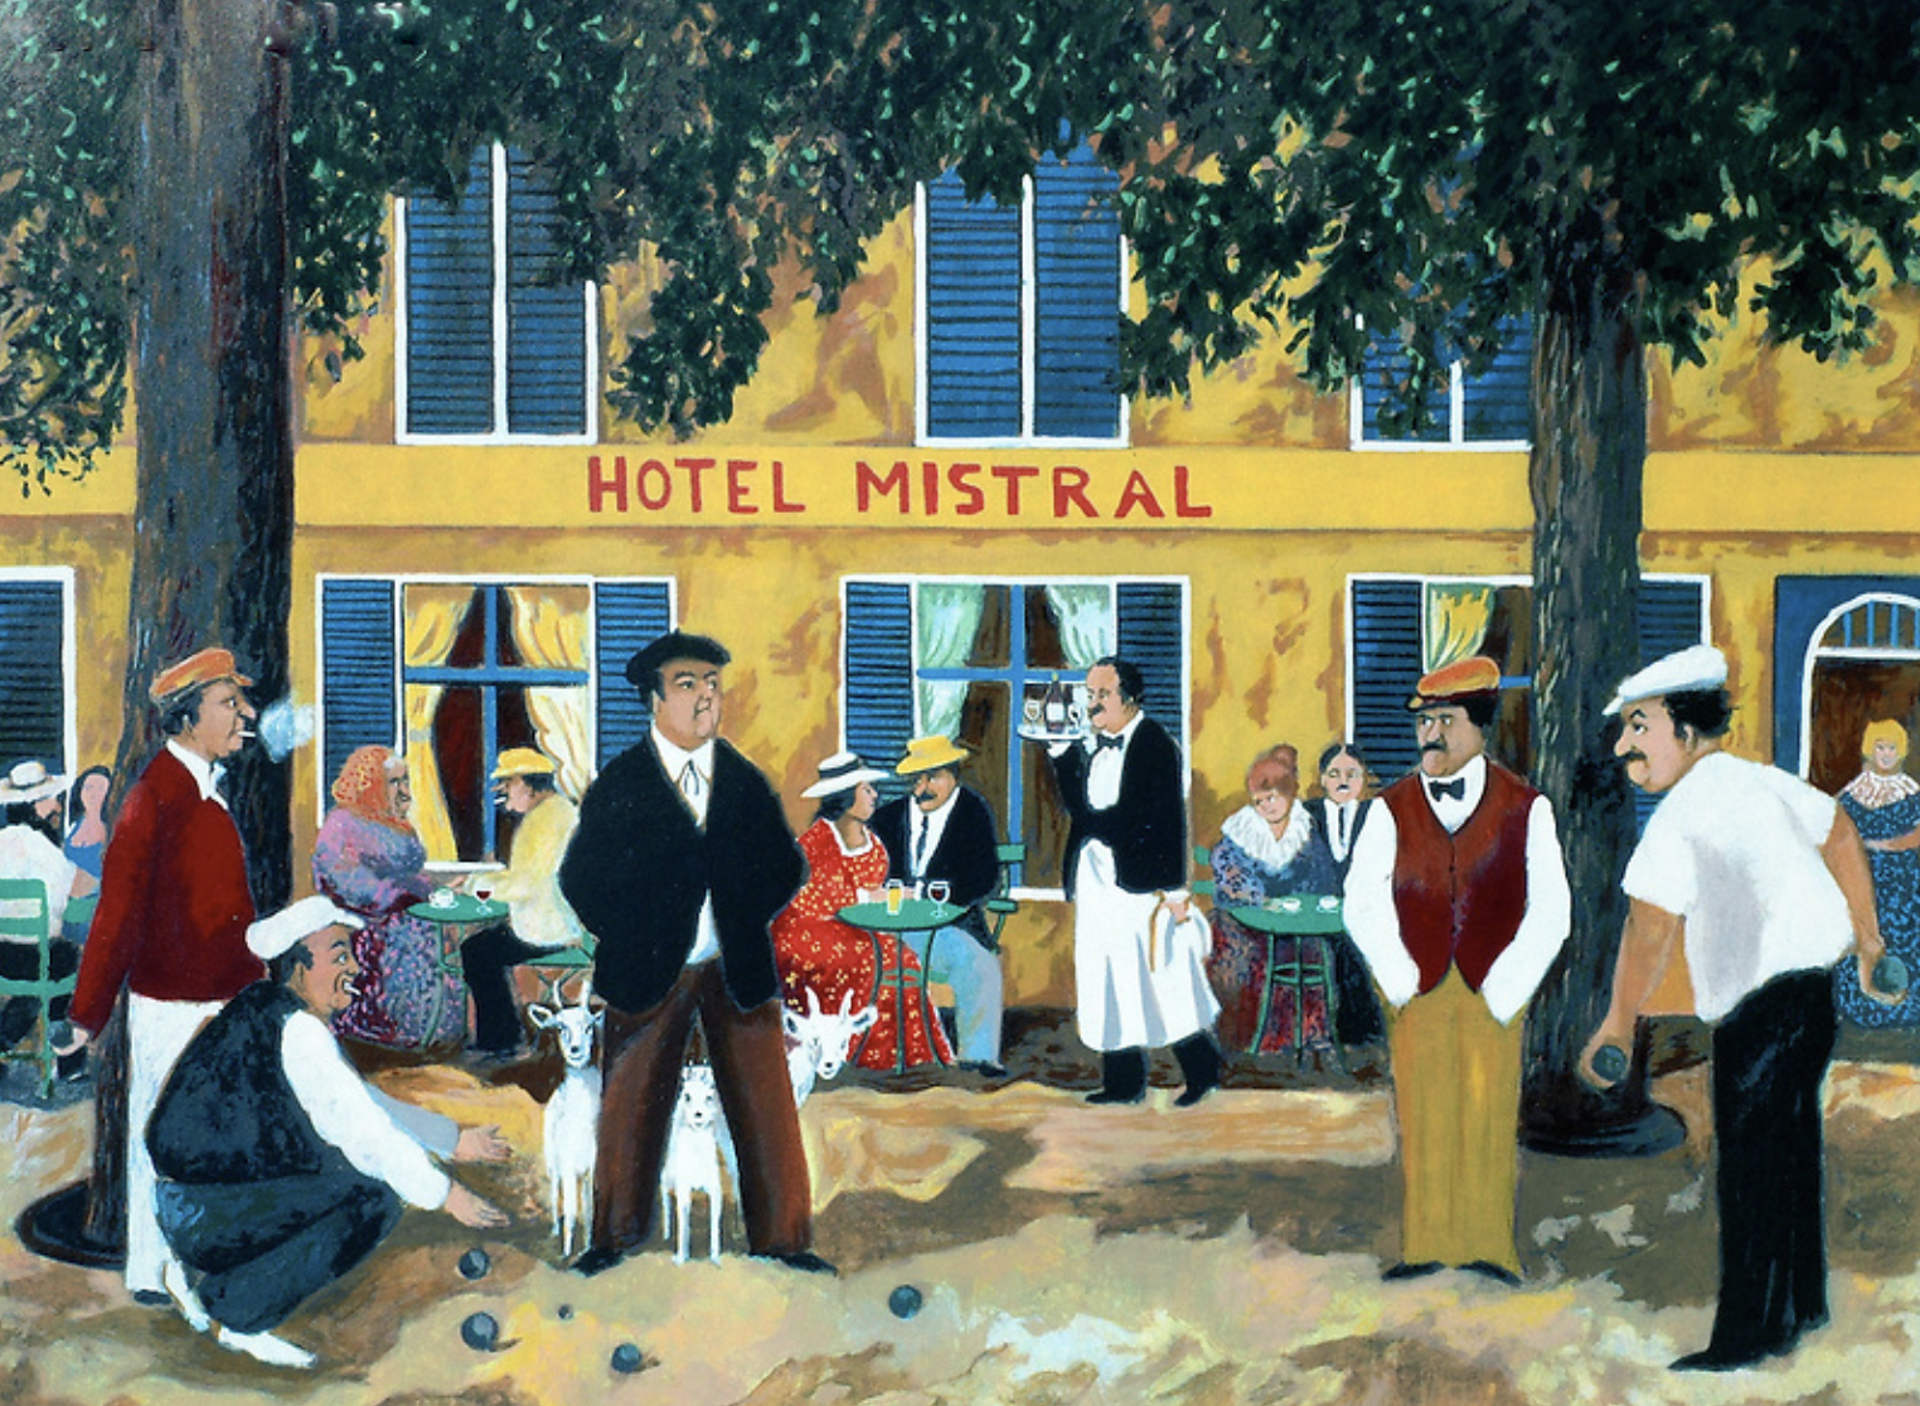 Hotel Mistral by Guy Buffet